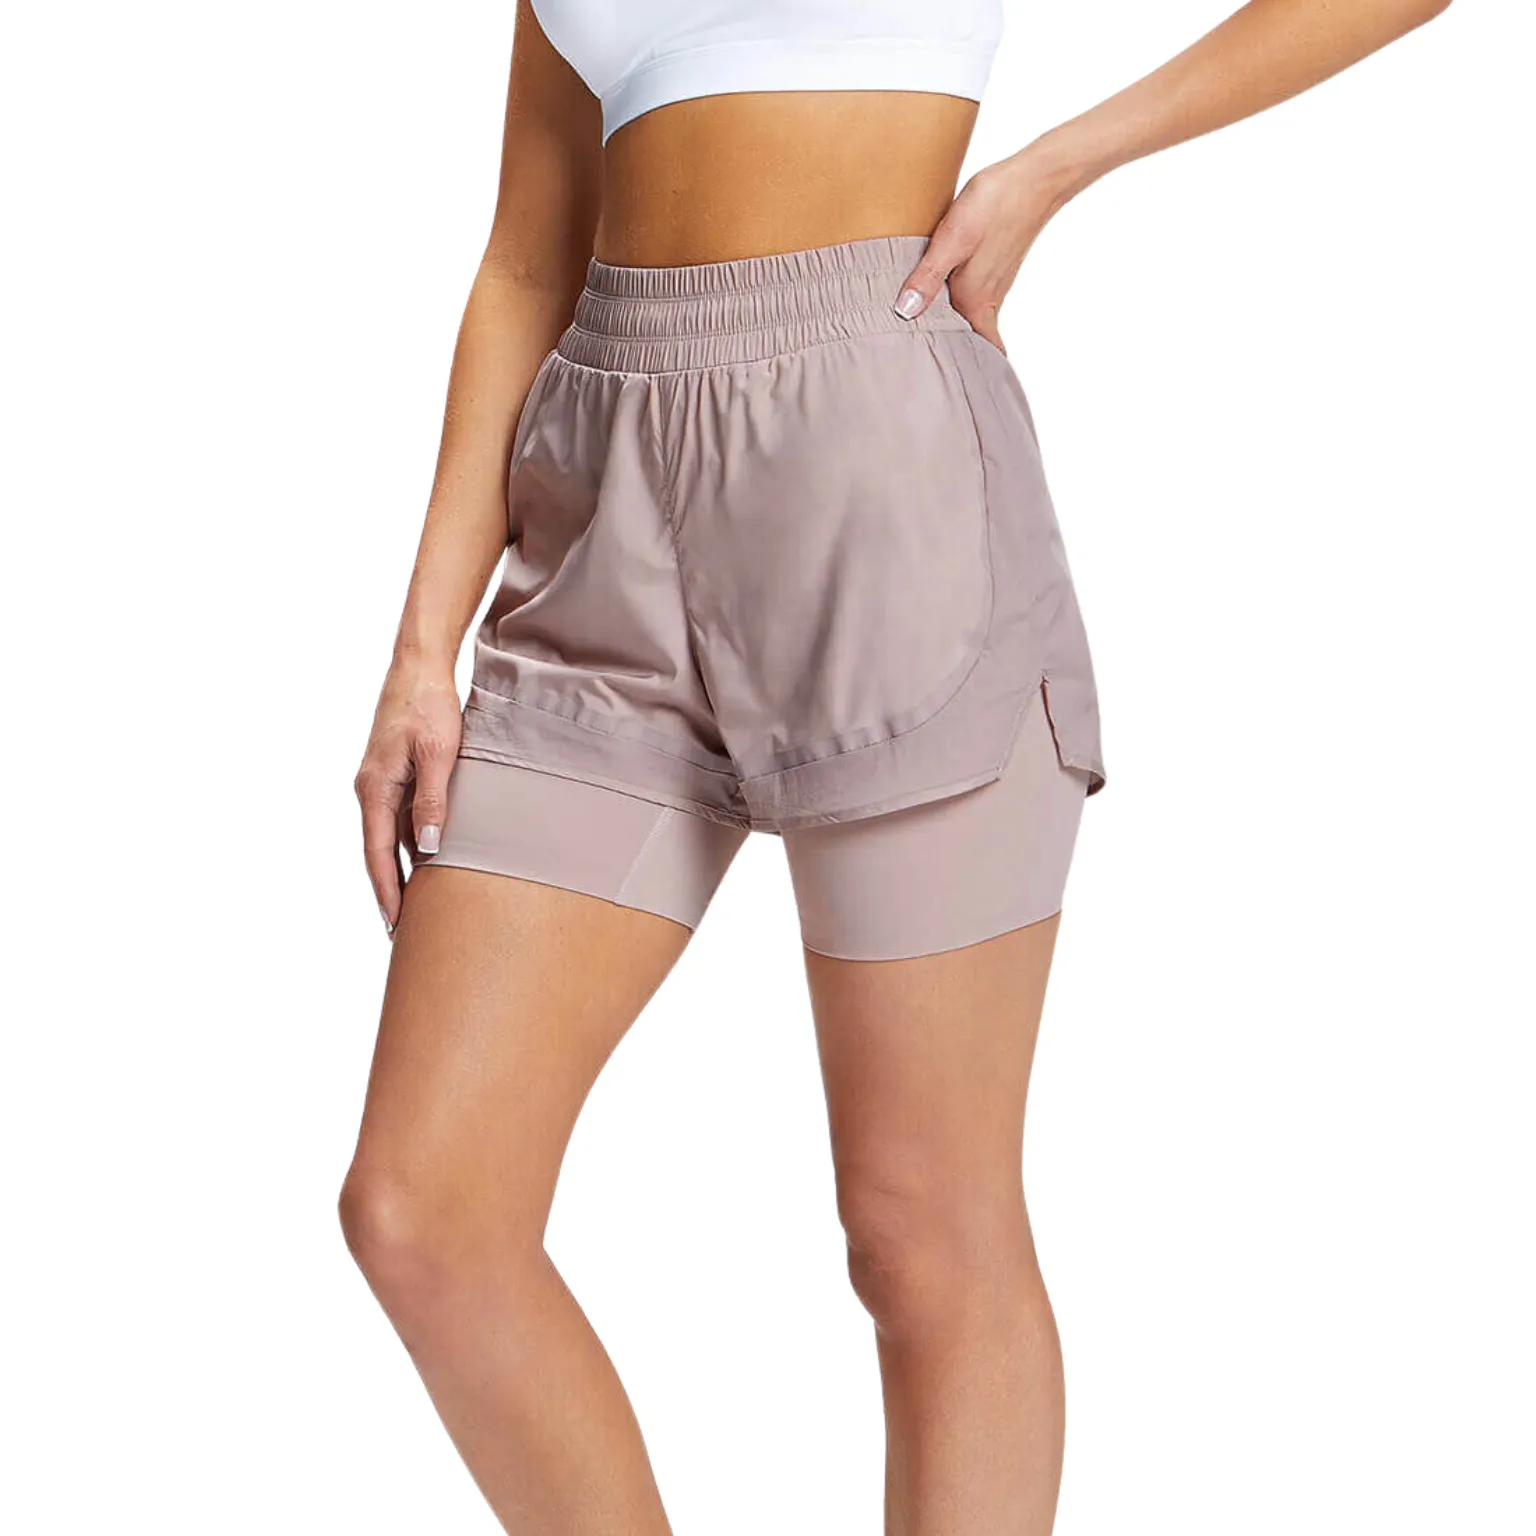 Layer Shorts Manufacturing Manufacturing with ethical workplace